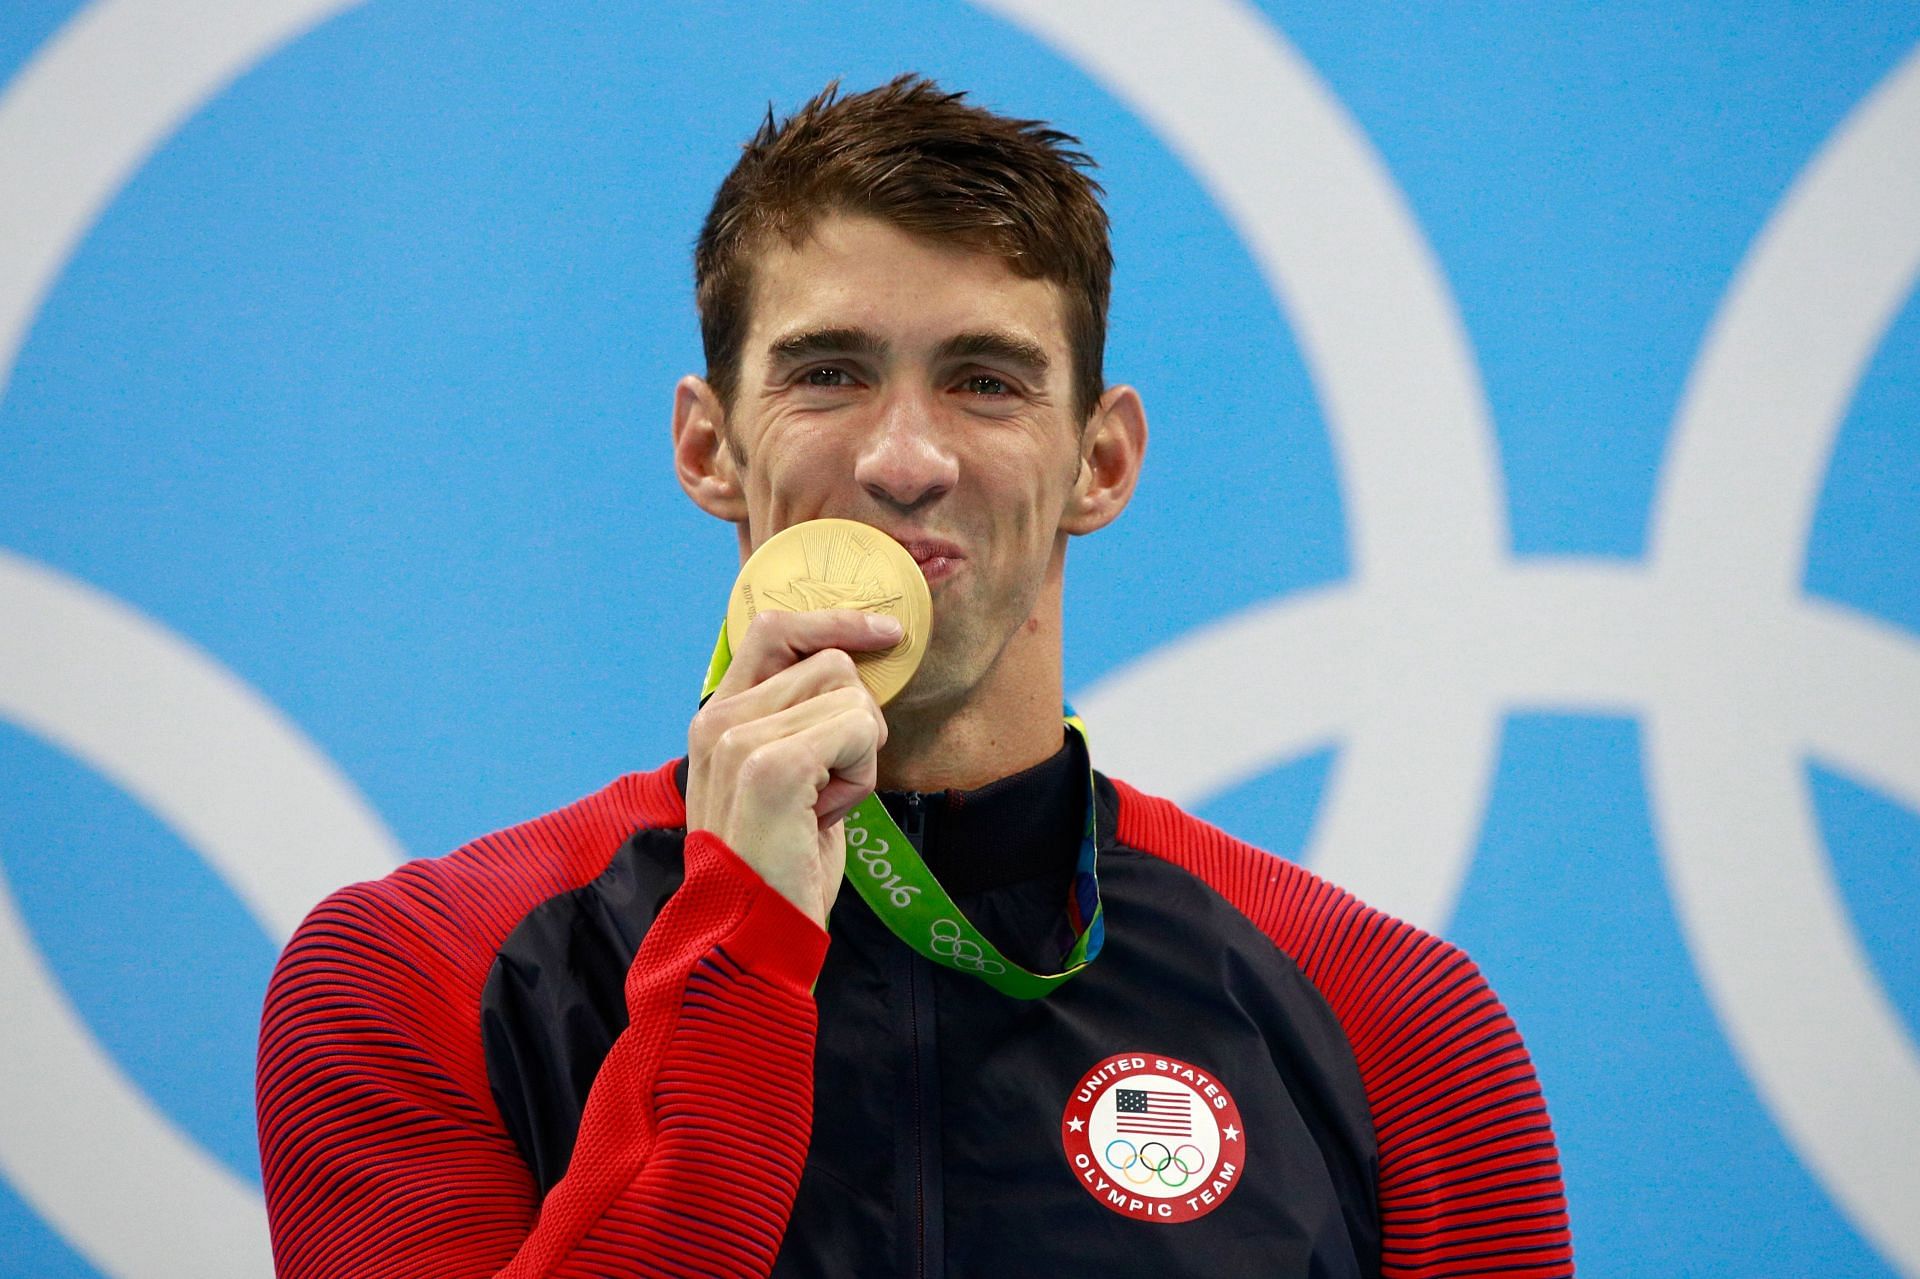 Michael Phelps at the 2016 Rio Olympics